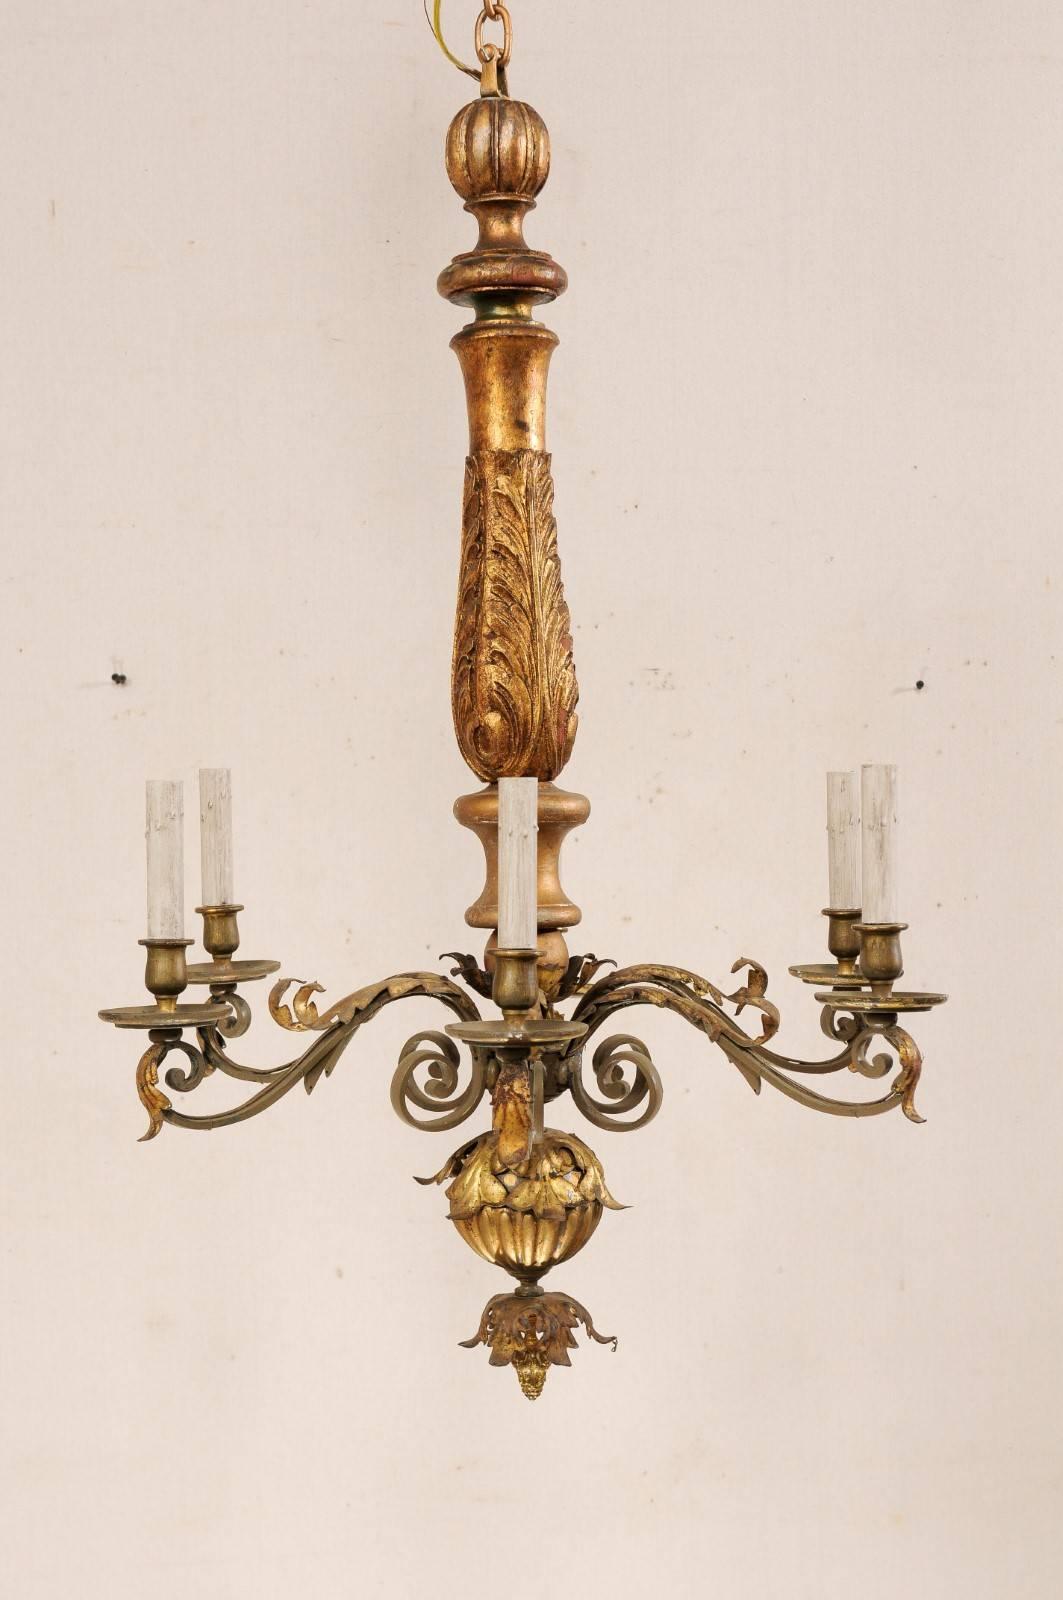 20th Century An Italian Acanthus-Carved Wood Column Chandelier w/Six Scrolled Metal Arms 